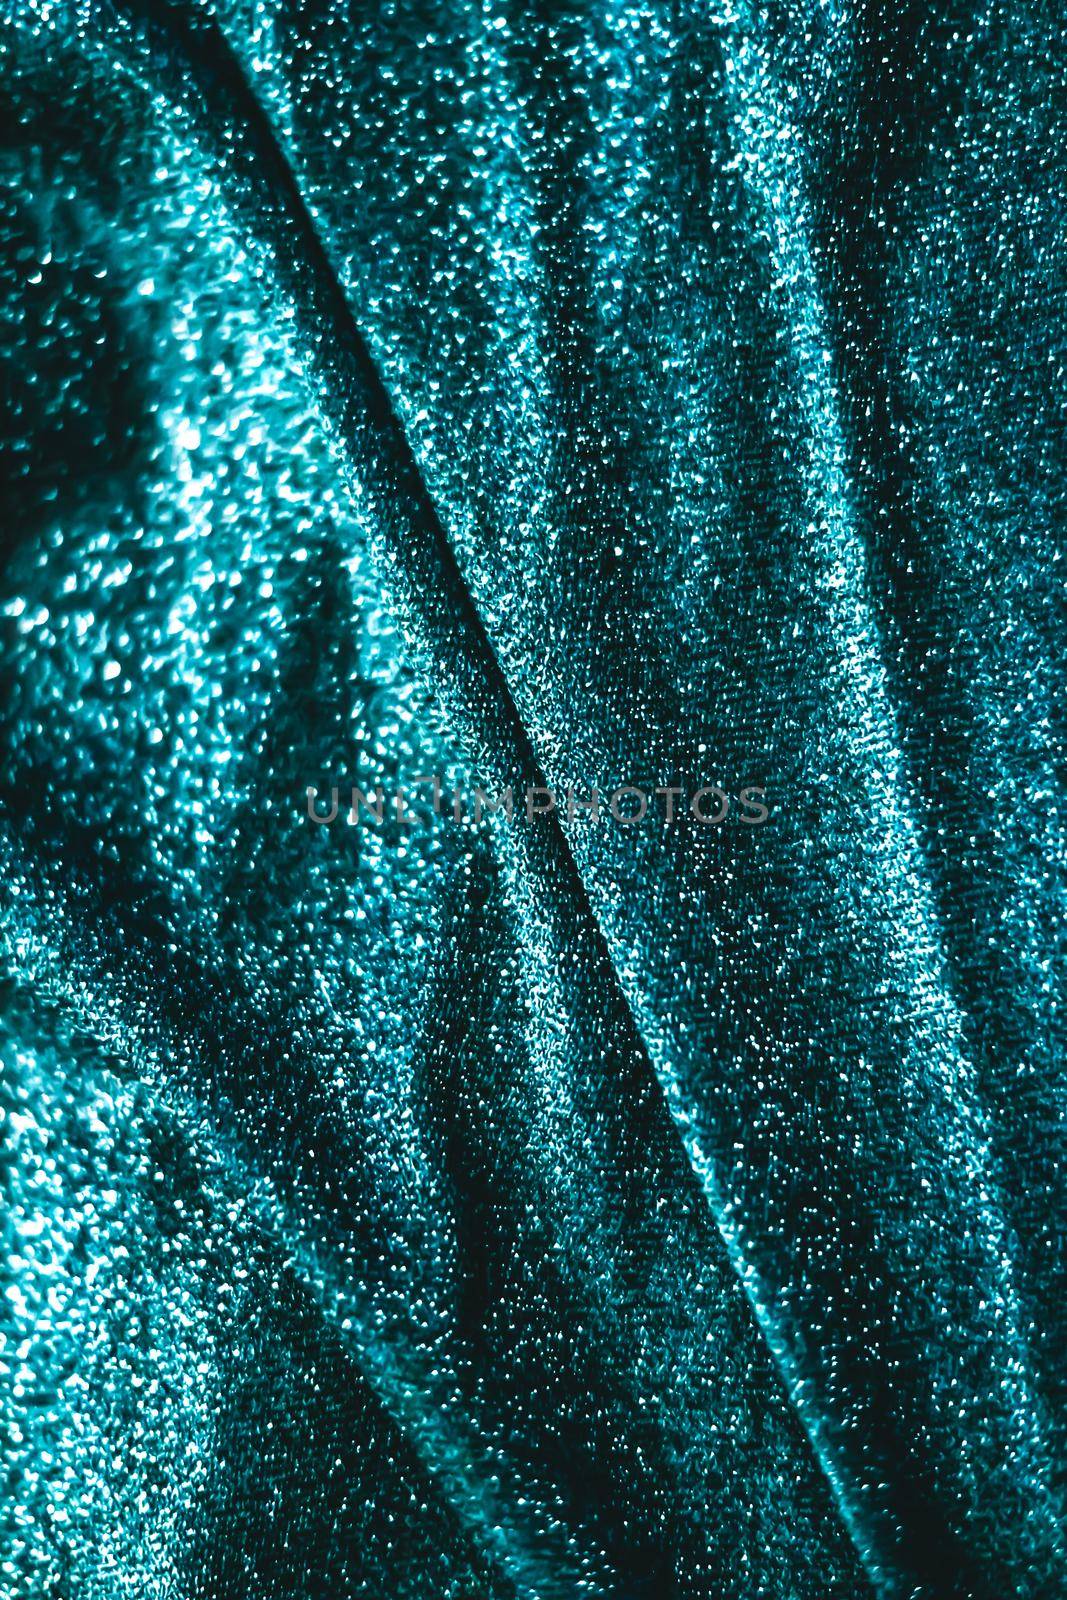 Luxe glowing texture, night club branding and New Years party concept - Emerald holiday sparkling glitter abstract background, luxury shiny fabric material for glamour design and festive invitation